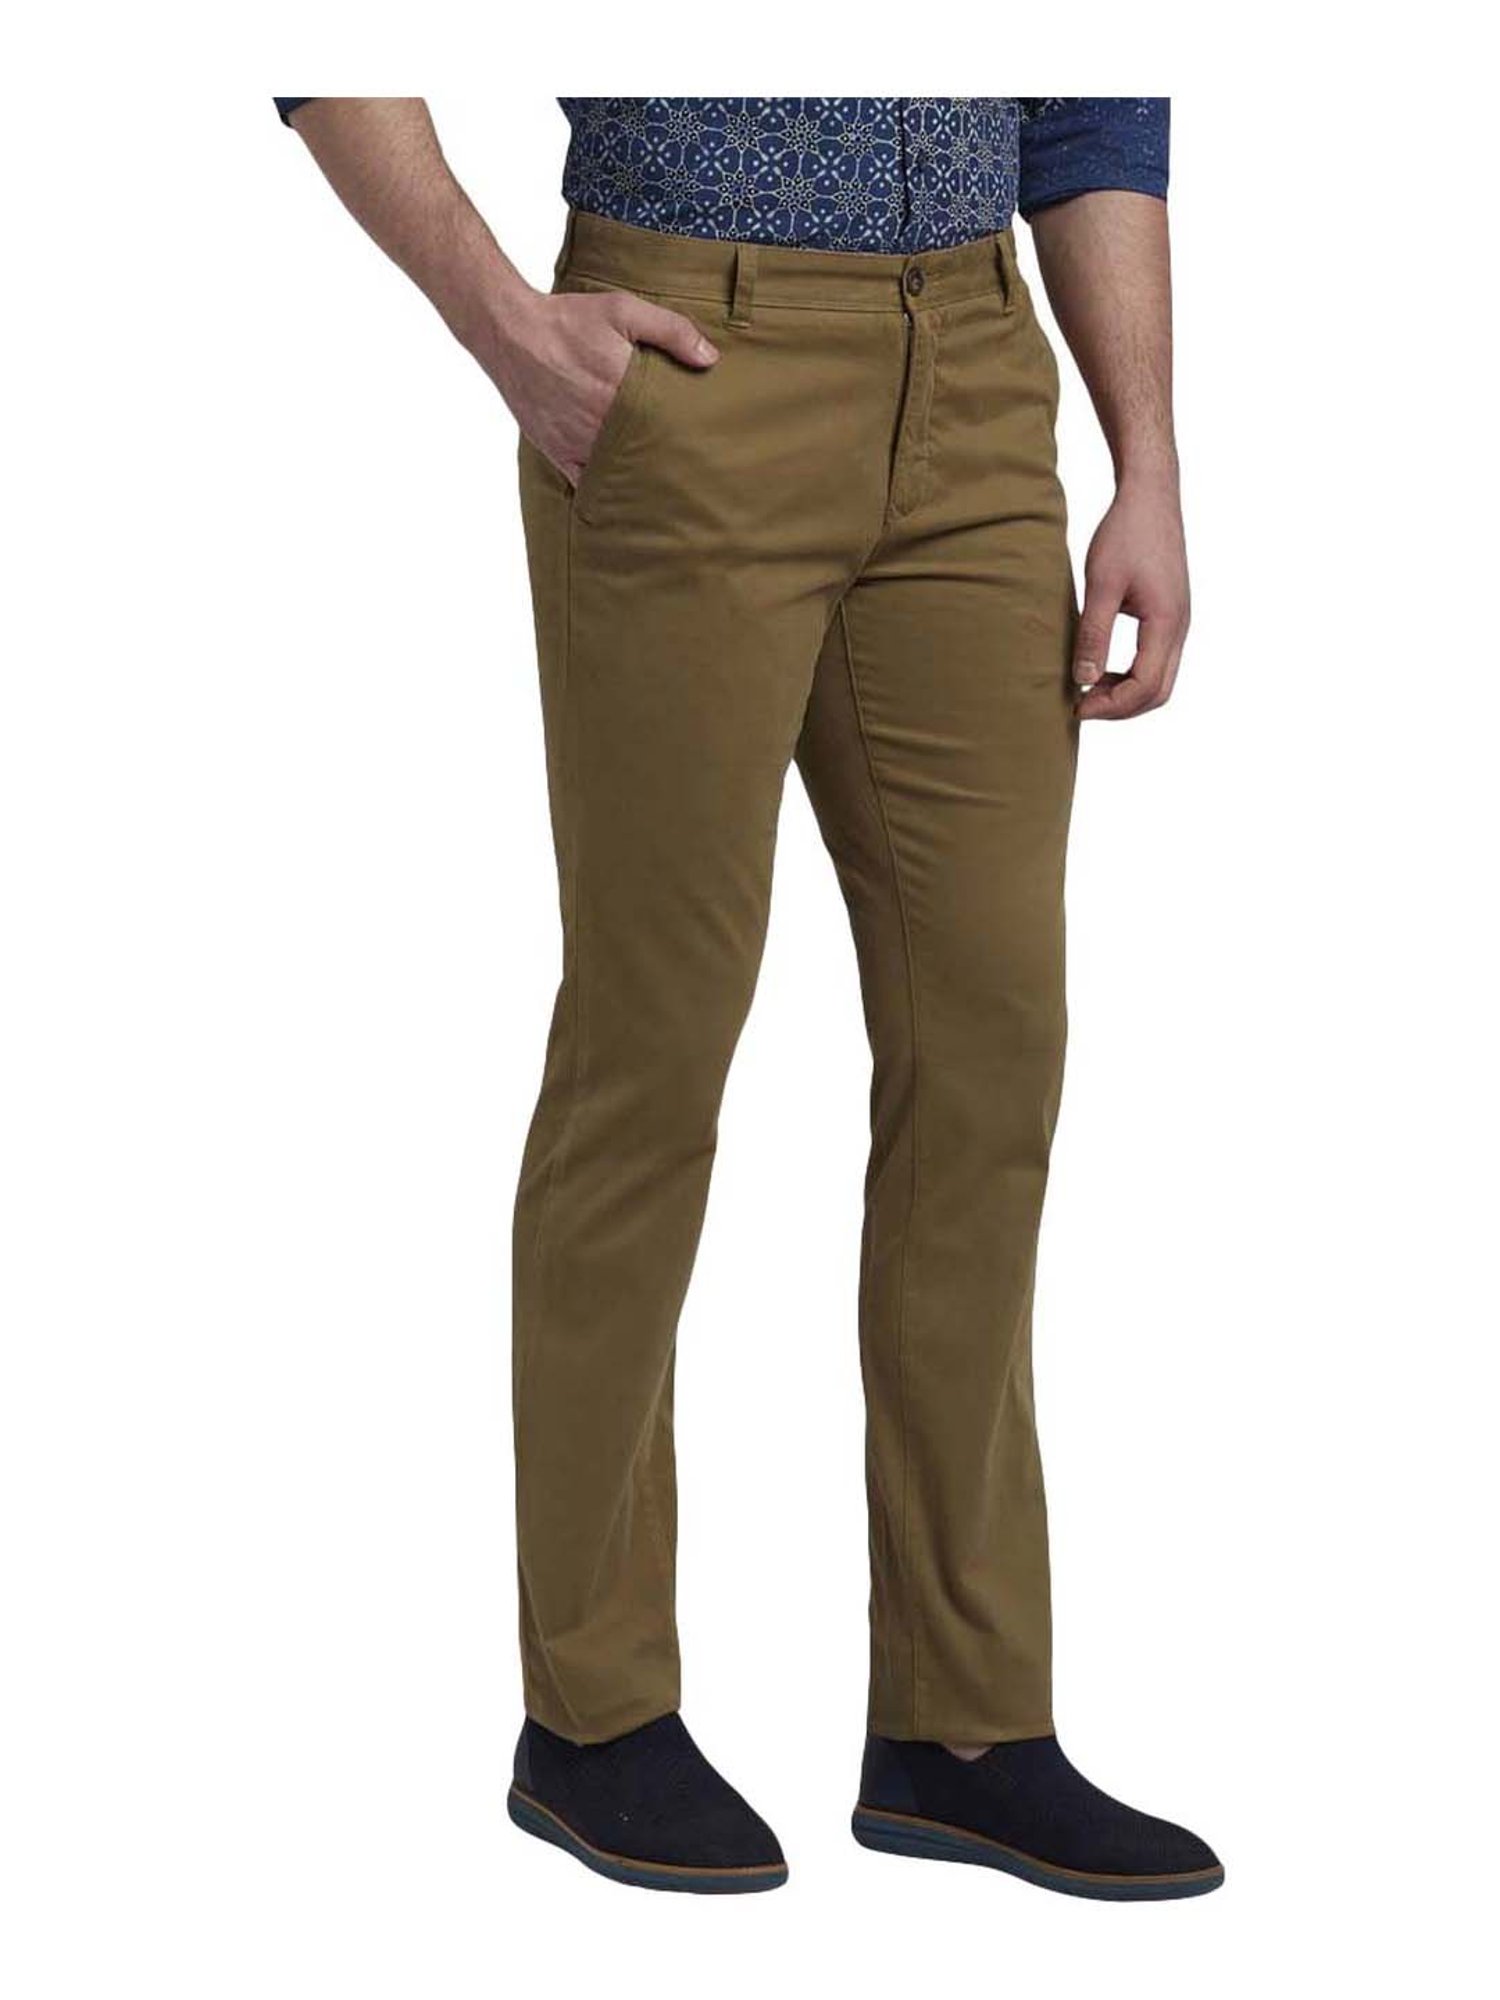 5 Best Chino Colors  Pants Every Man Should Own in 2022